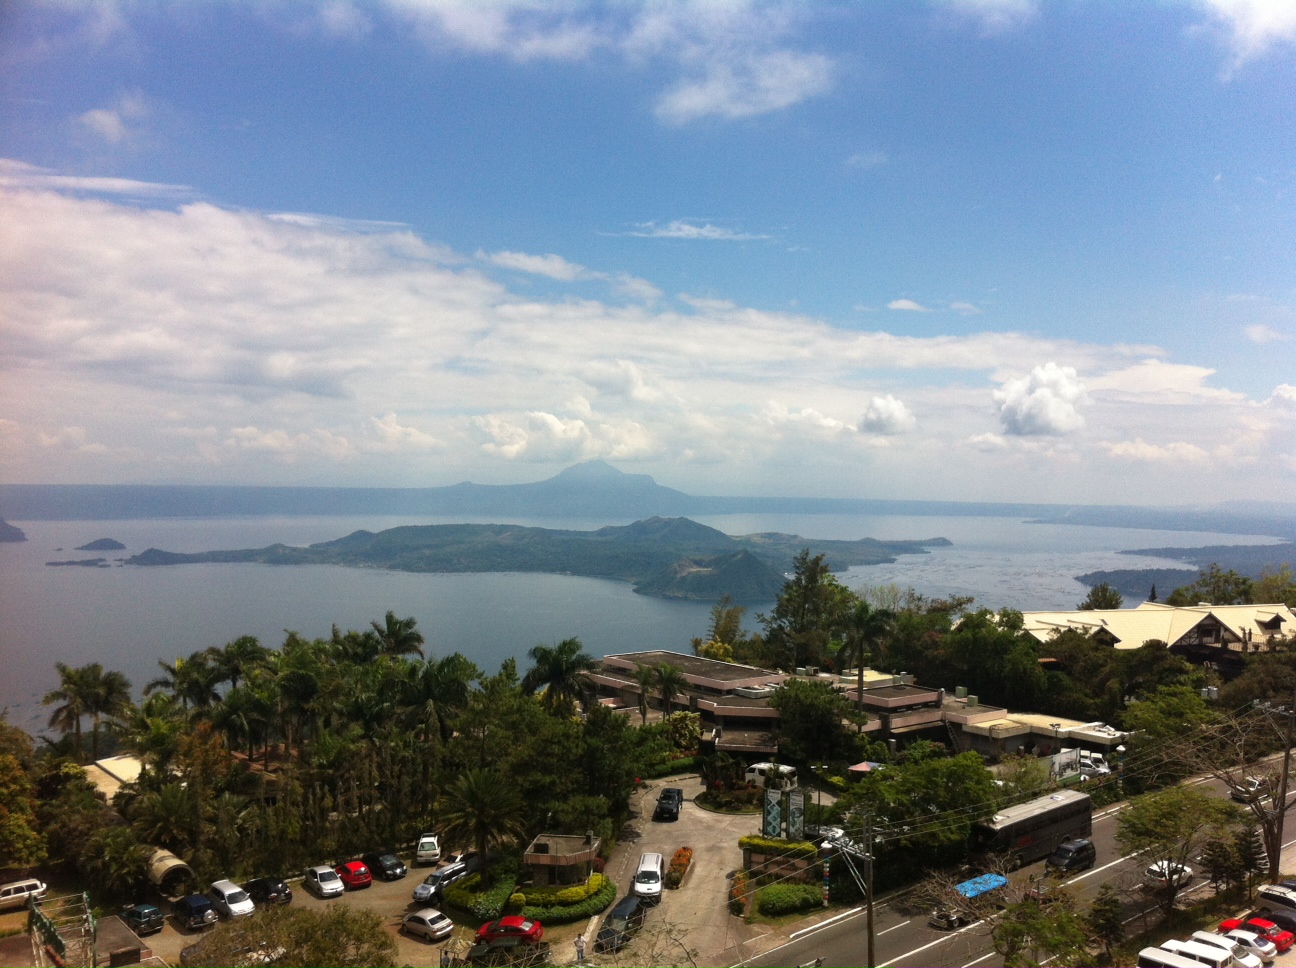 Lake Taal from above